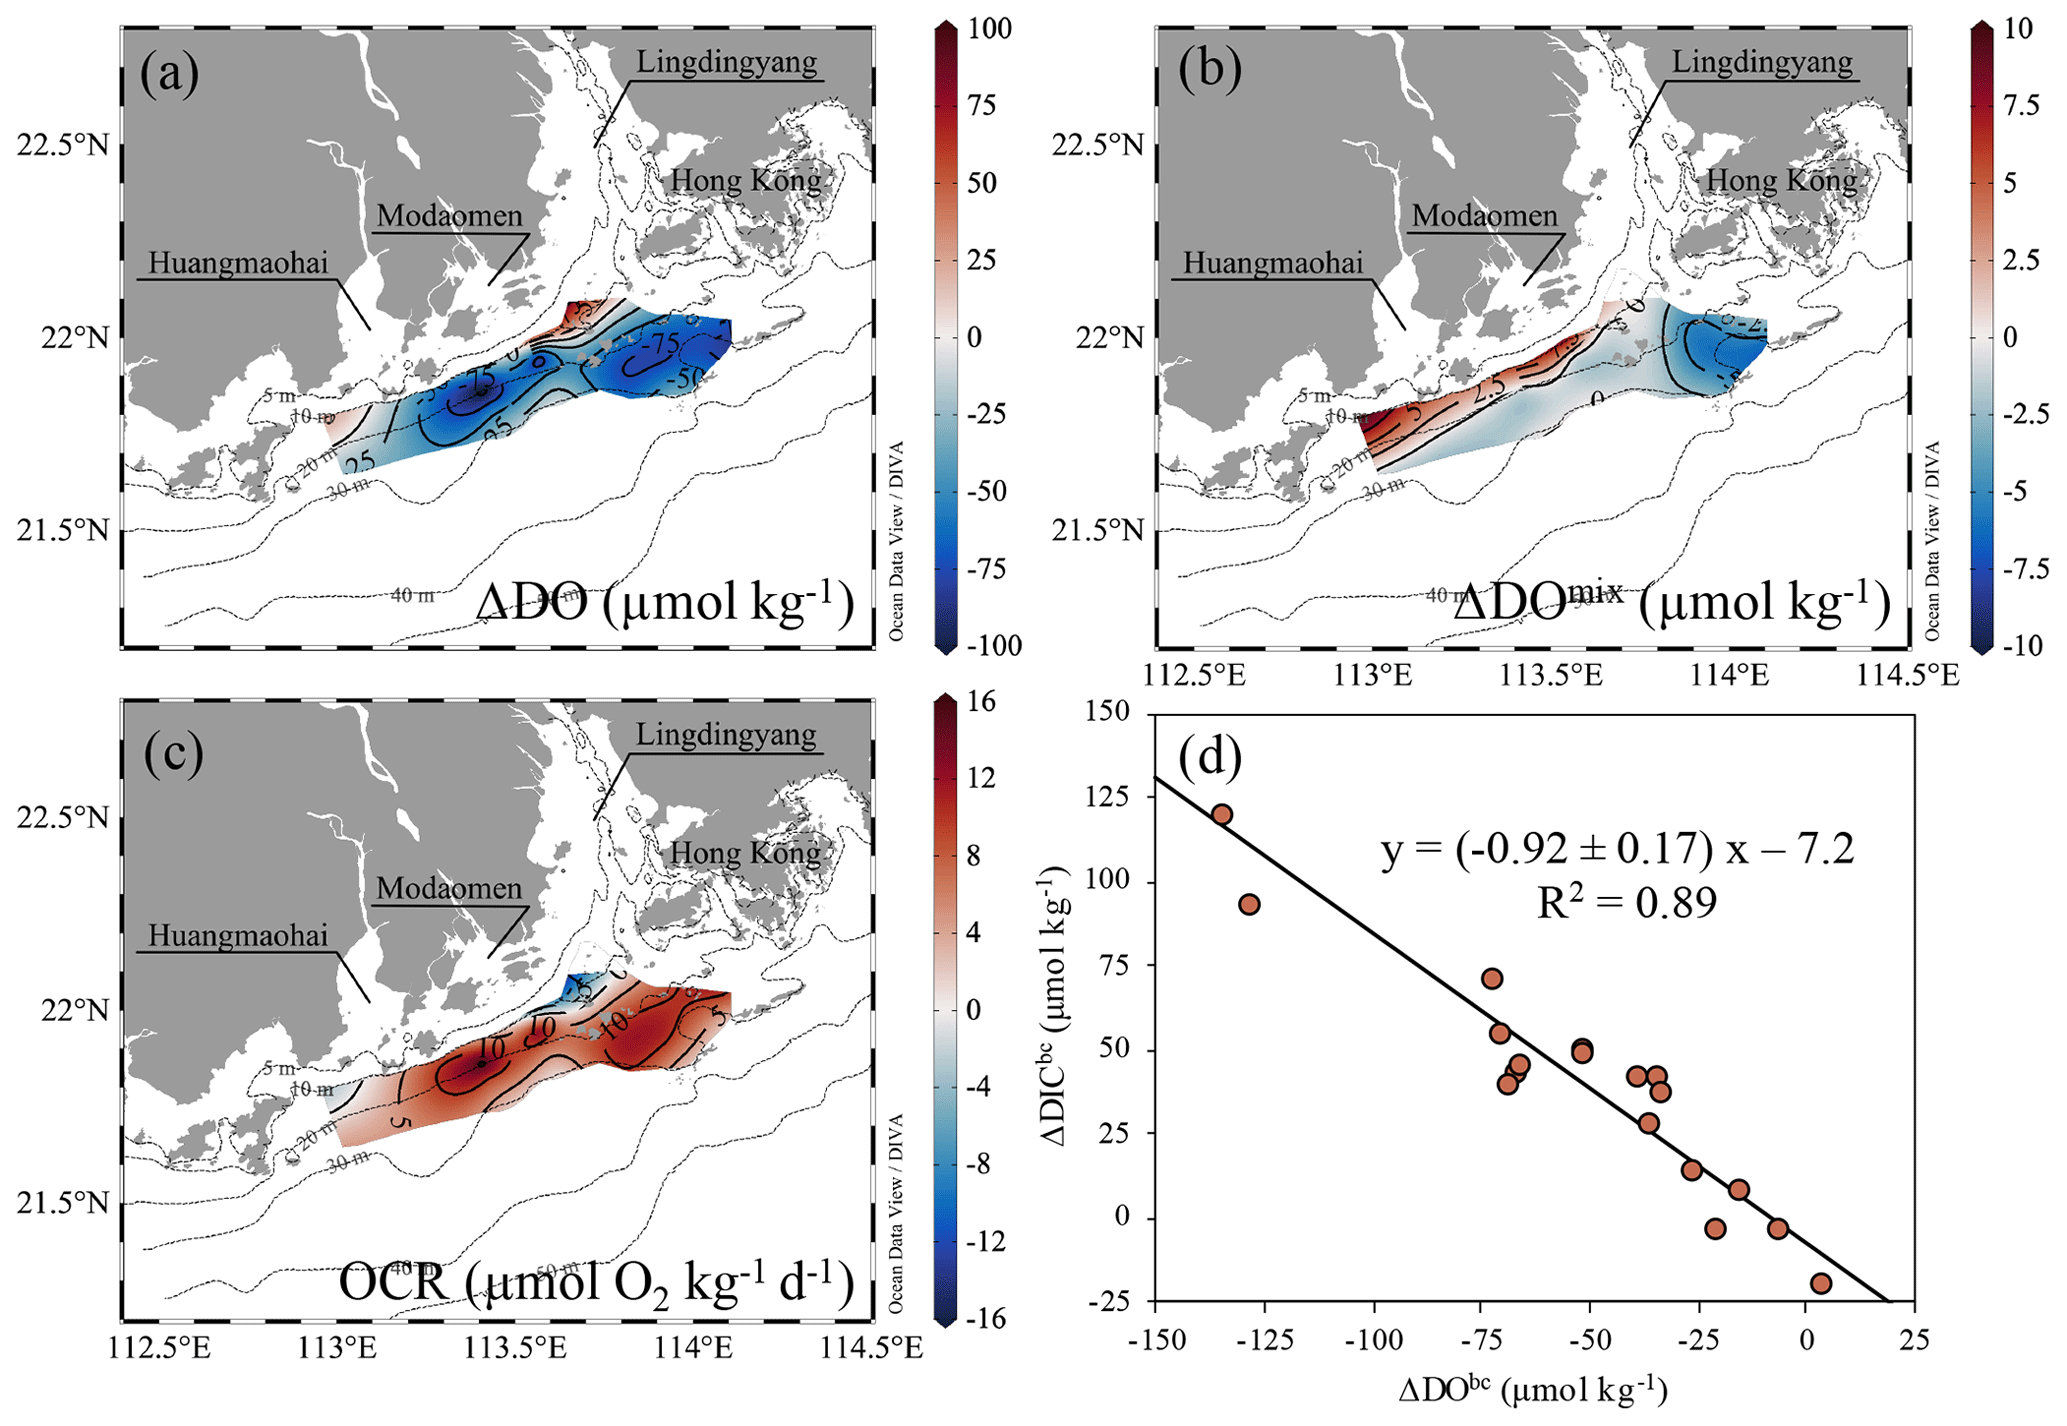 BG - Destruction and reinstatement of coastal hypoxia in the South